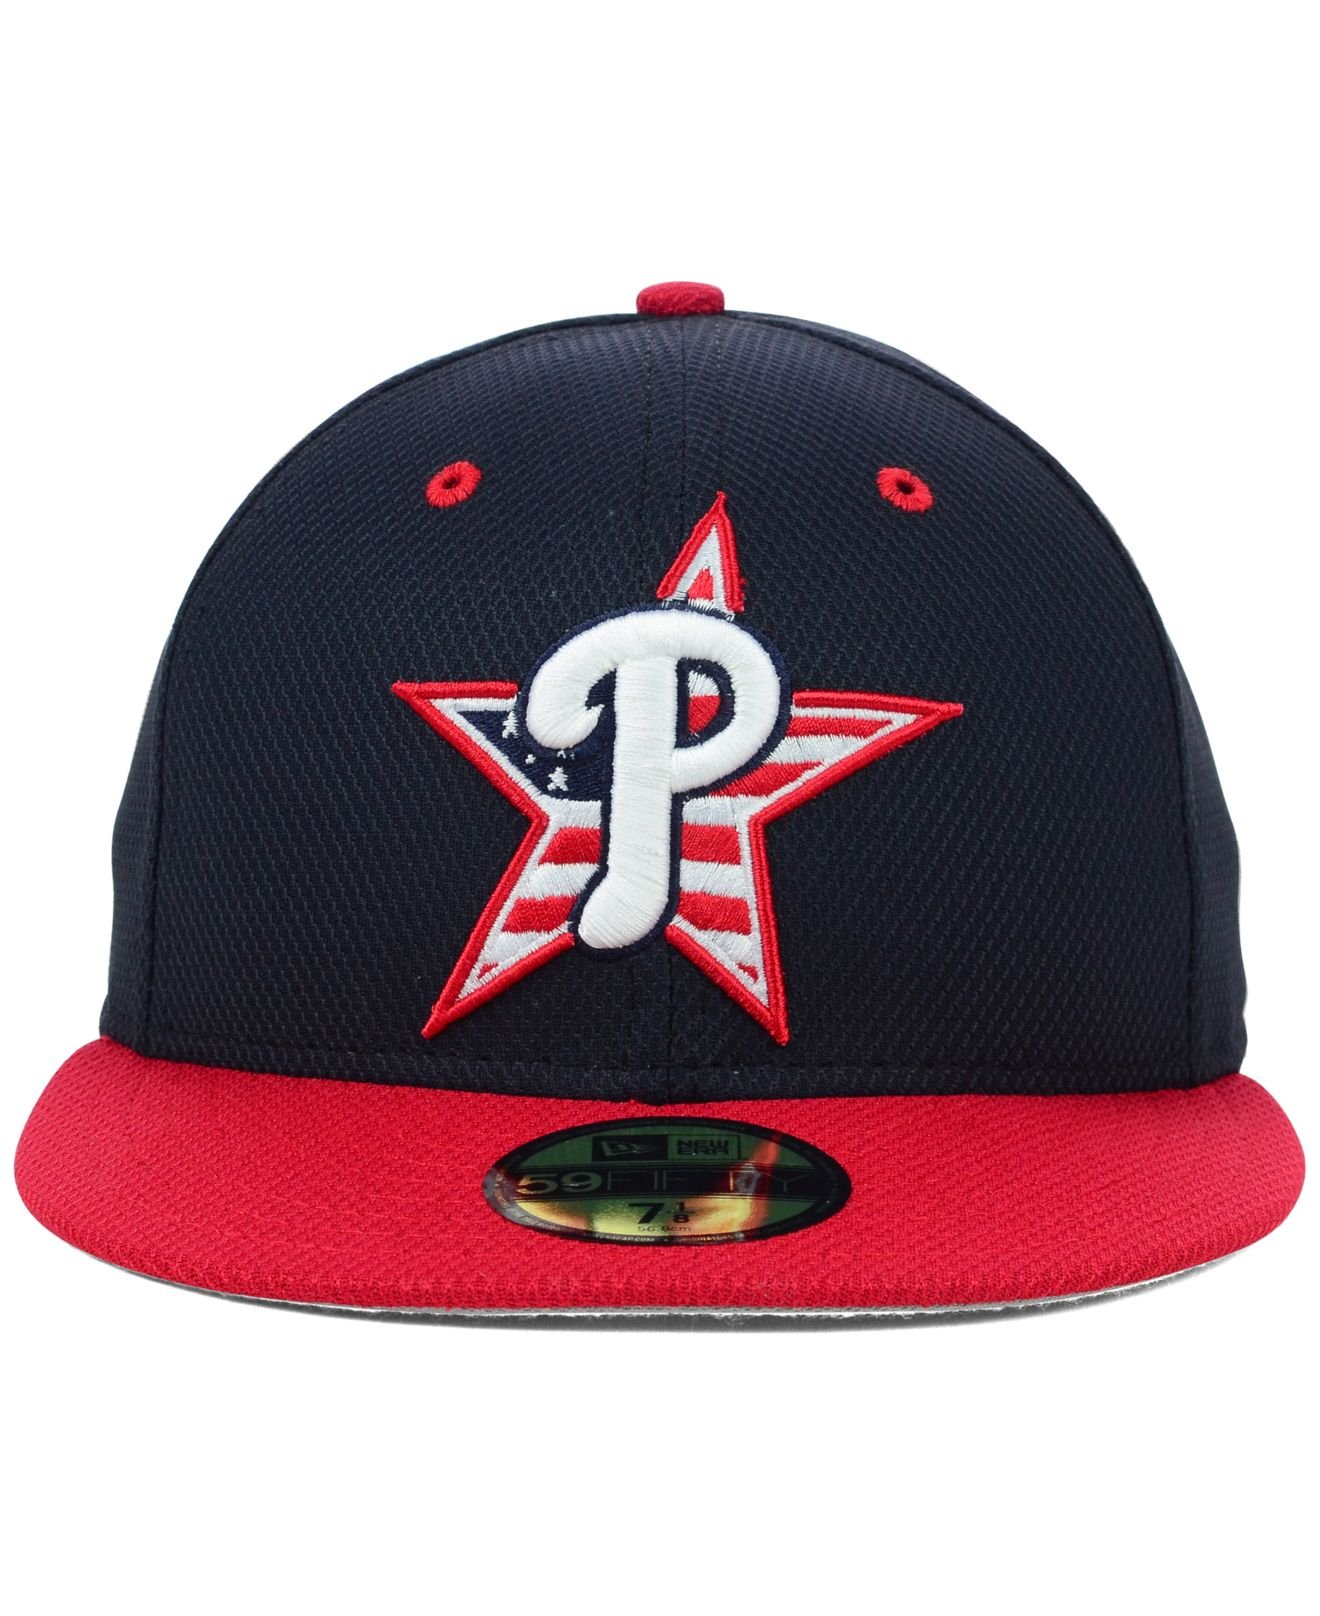 MLB celebrates 4th of July with USA-themed caps  How to buy a Yankees,  Mets, Phillies 4th of July hat 